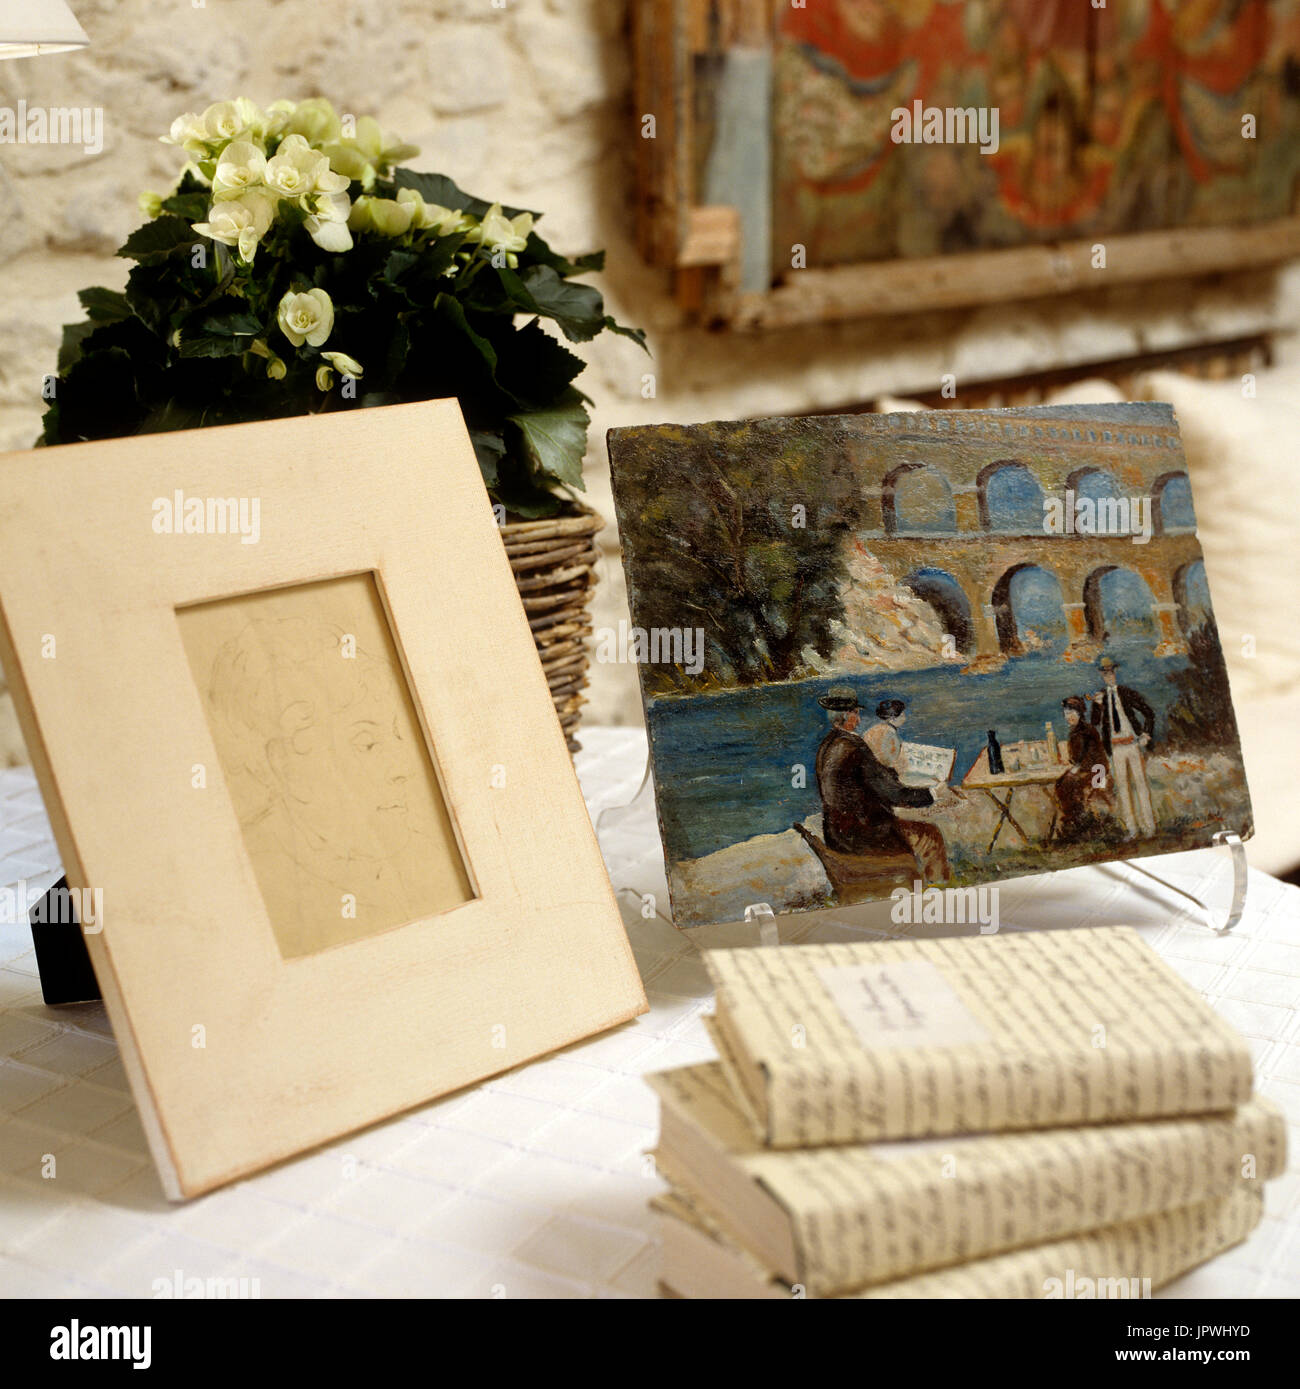 'Books, frame, painting and floral arrangement on table'small Stock Photo